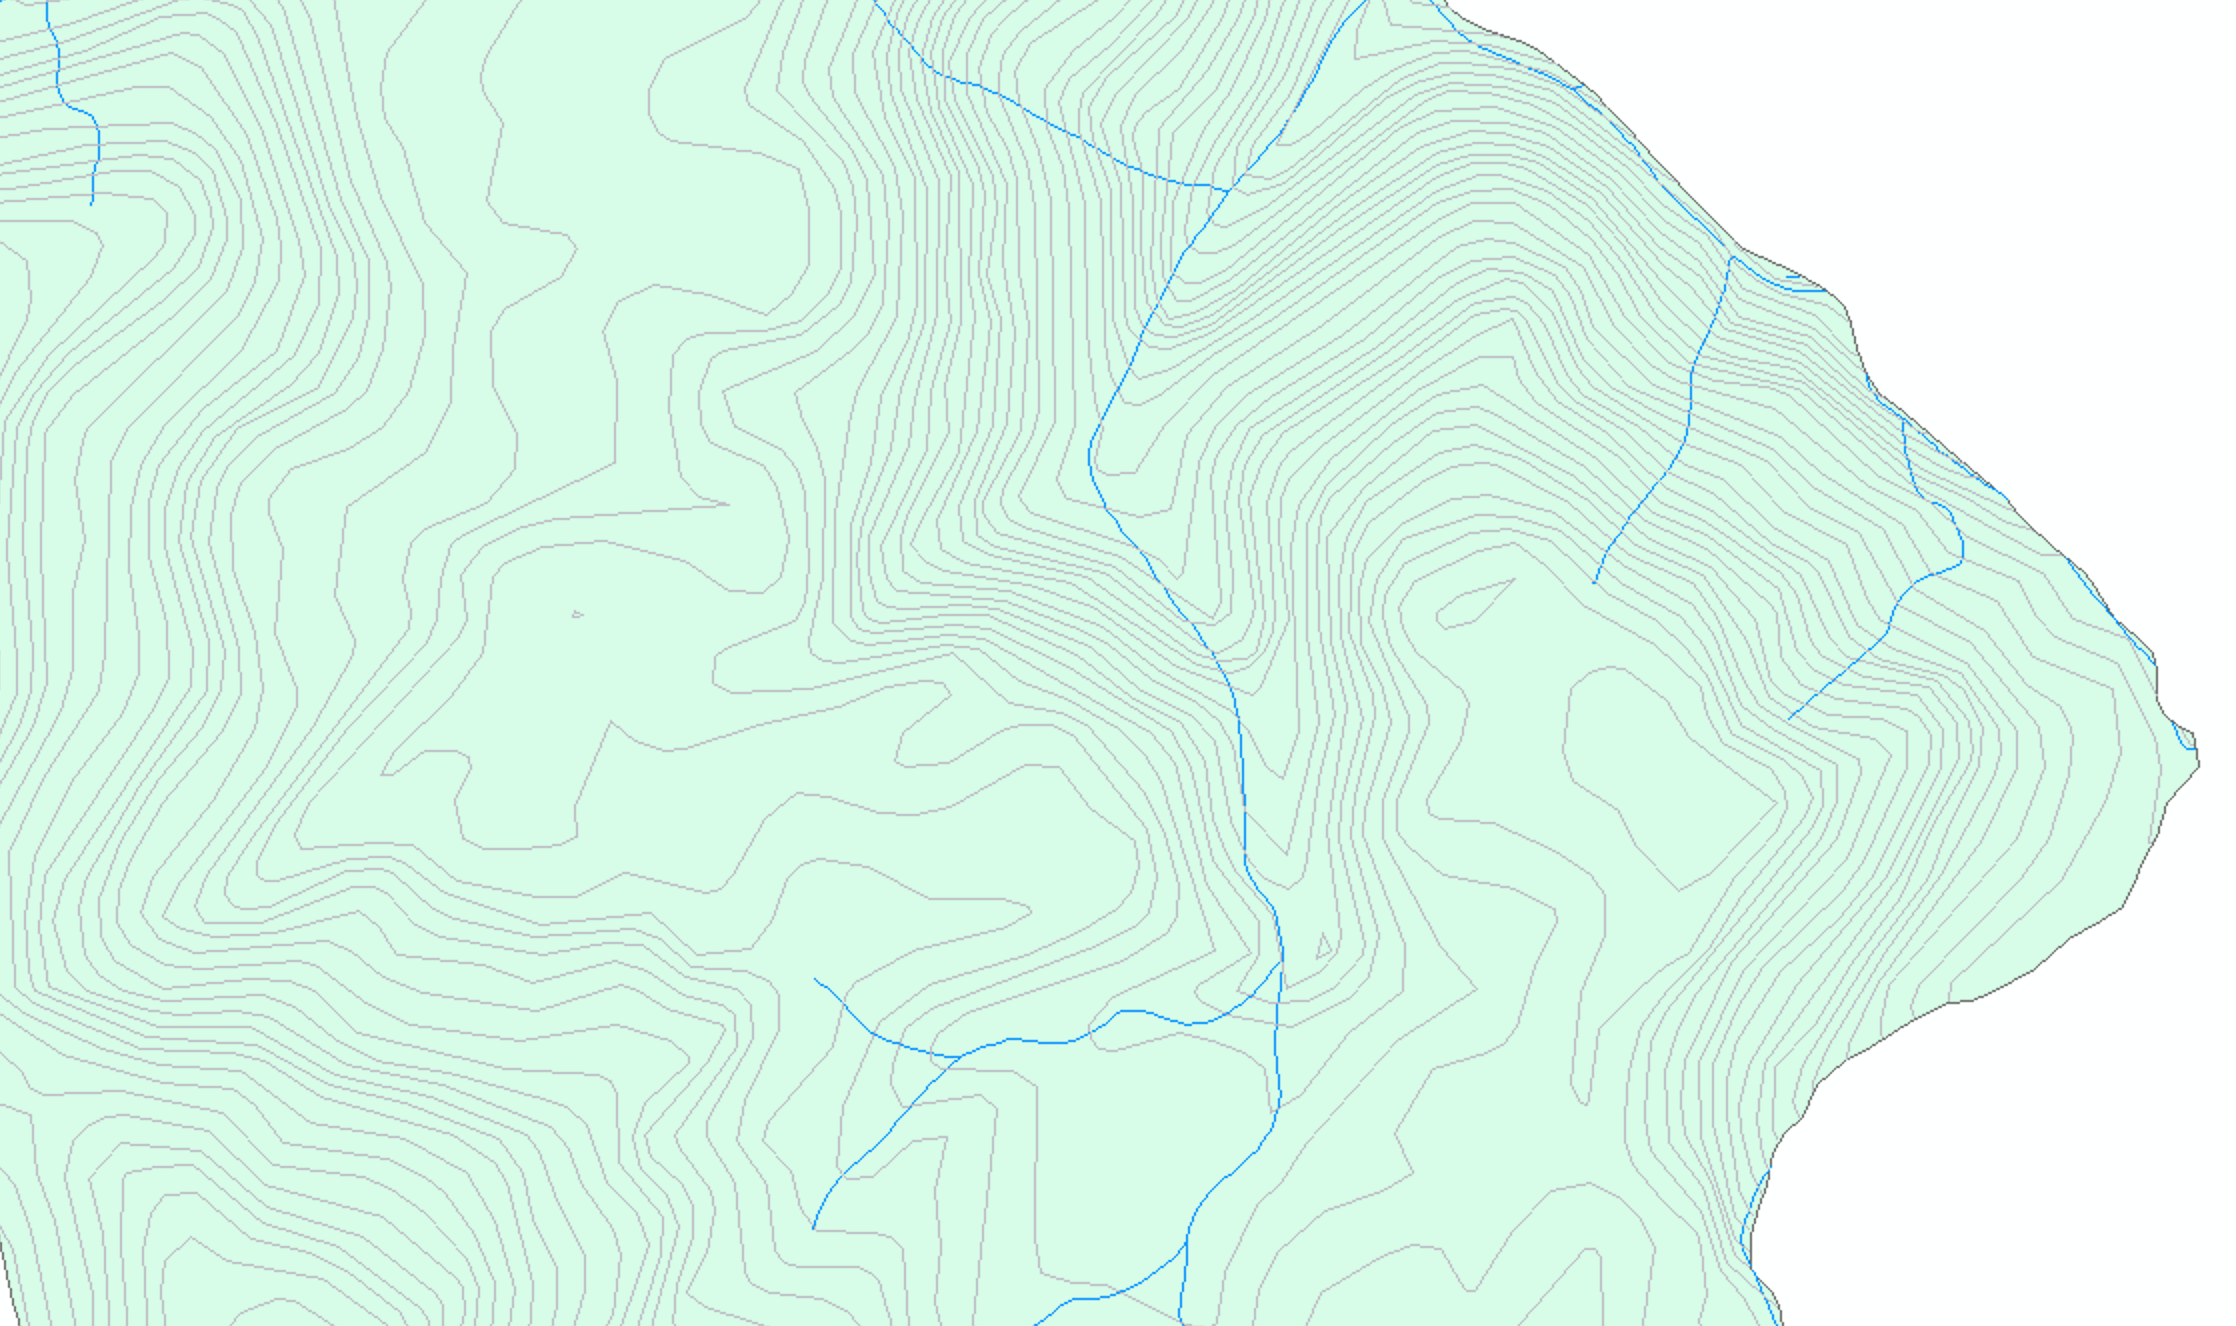 The Basemap with layers of block, stream & contour